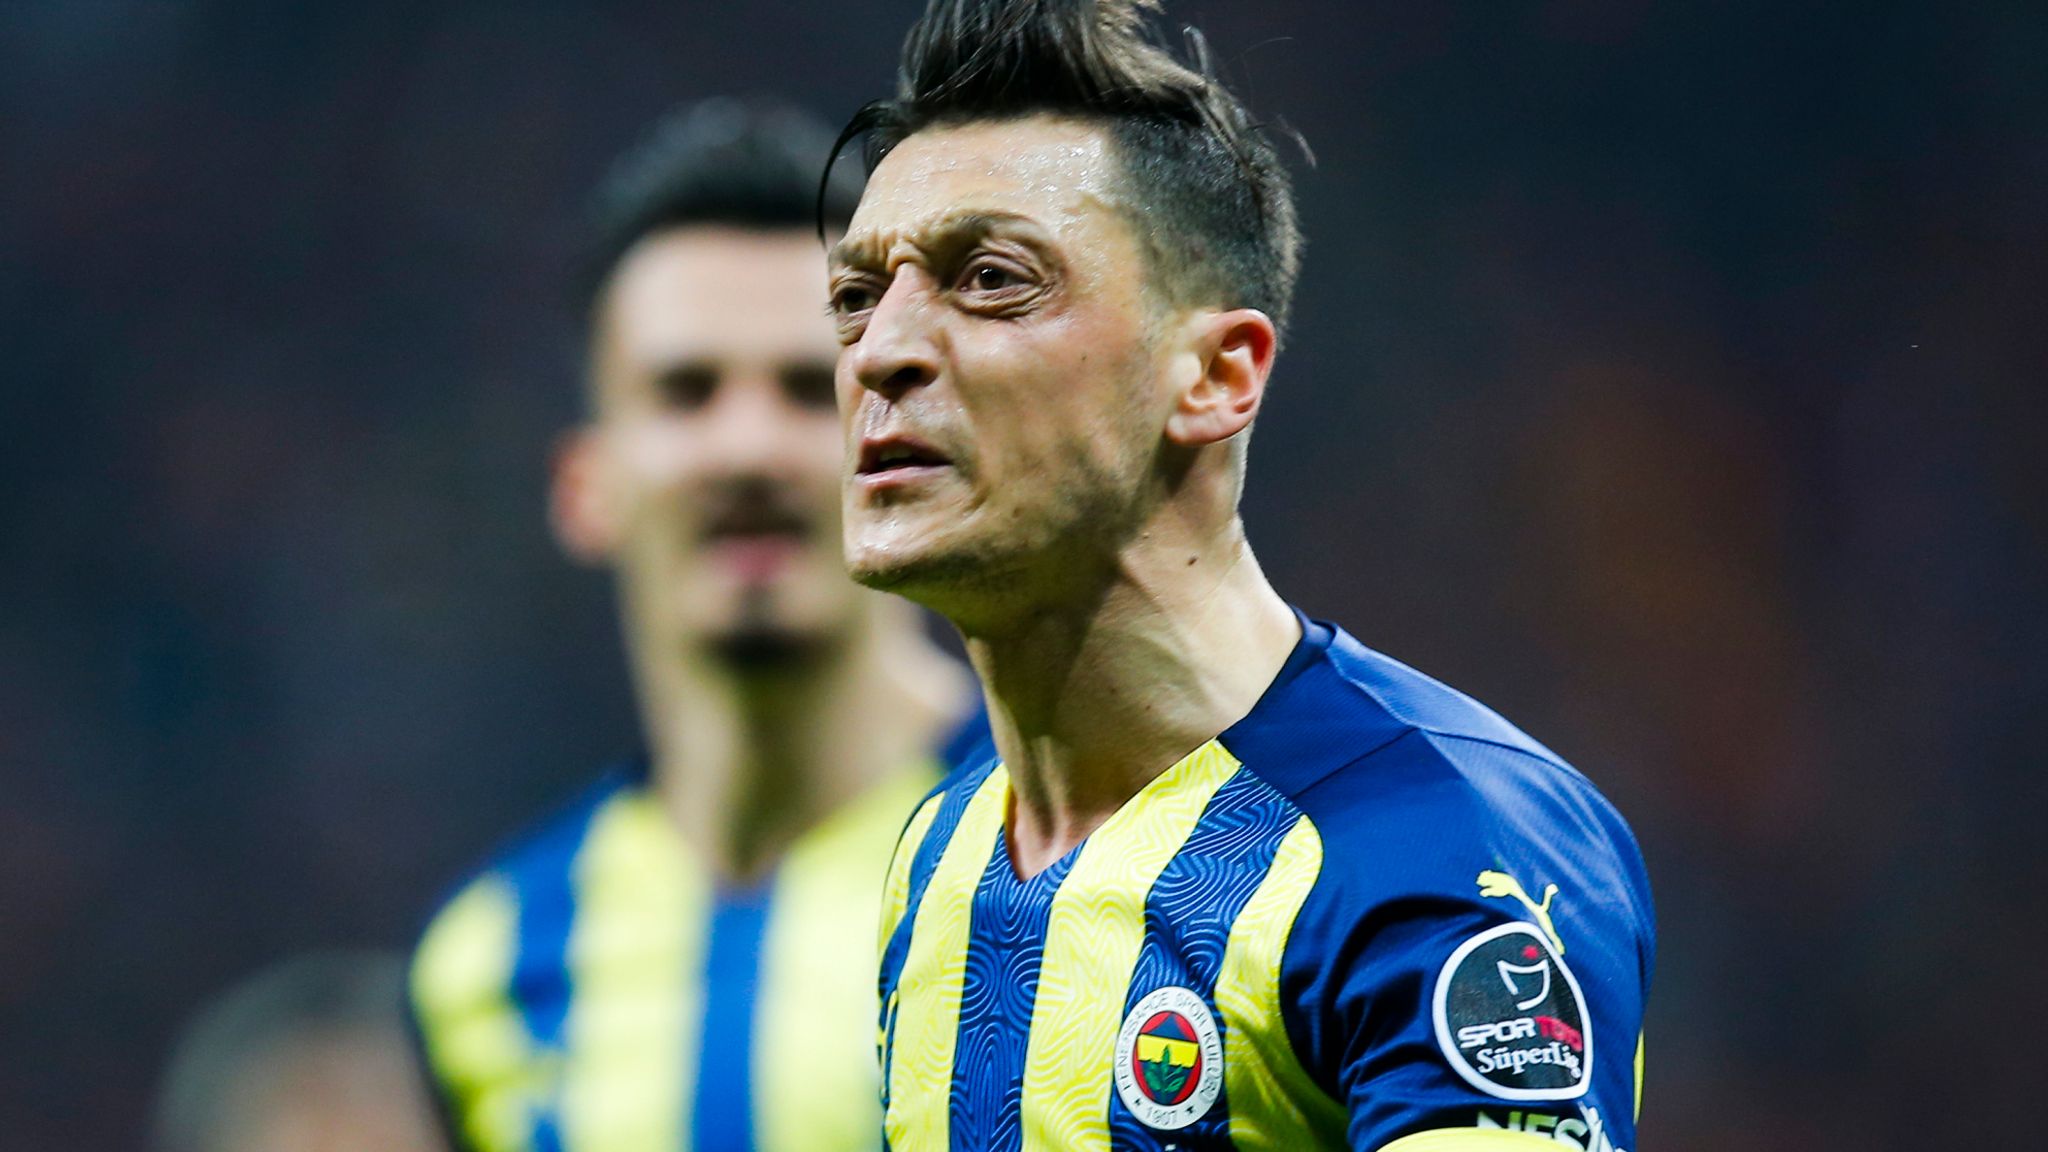 Mesut Ozil will move into eSports after Fenerbahce, says Germans agent Football News Sky Sports